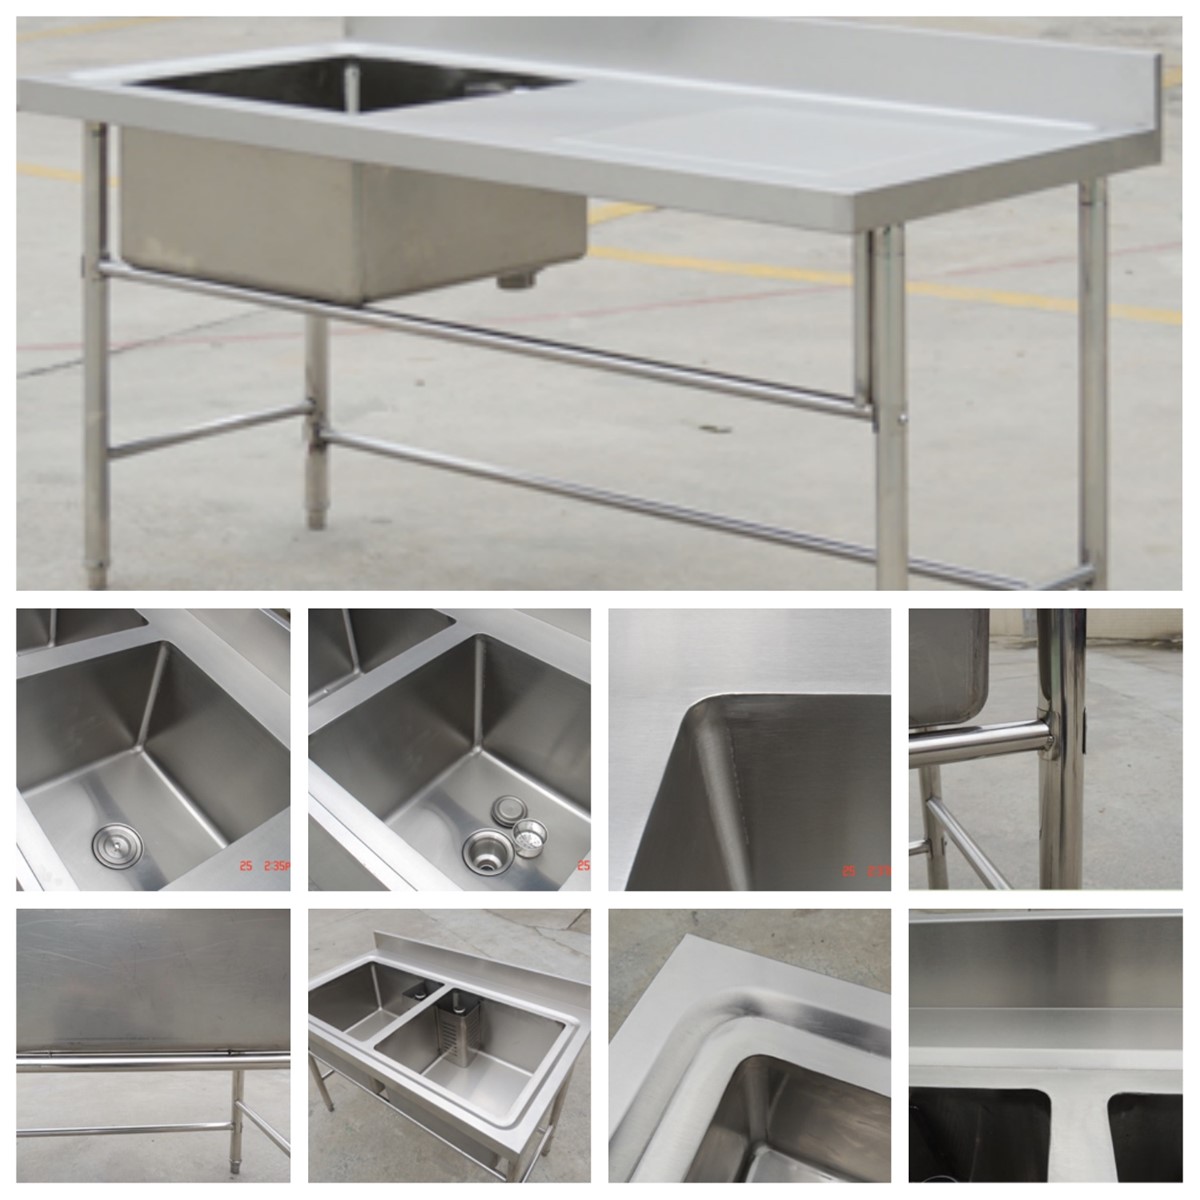 Stainless Steel Single Sink with LeftRight Grooved Board and Under Shelf